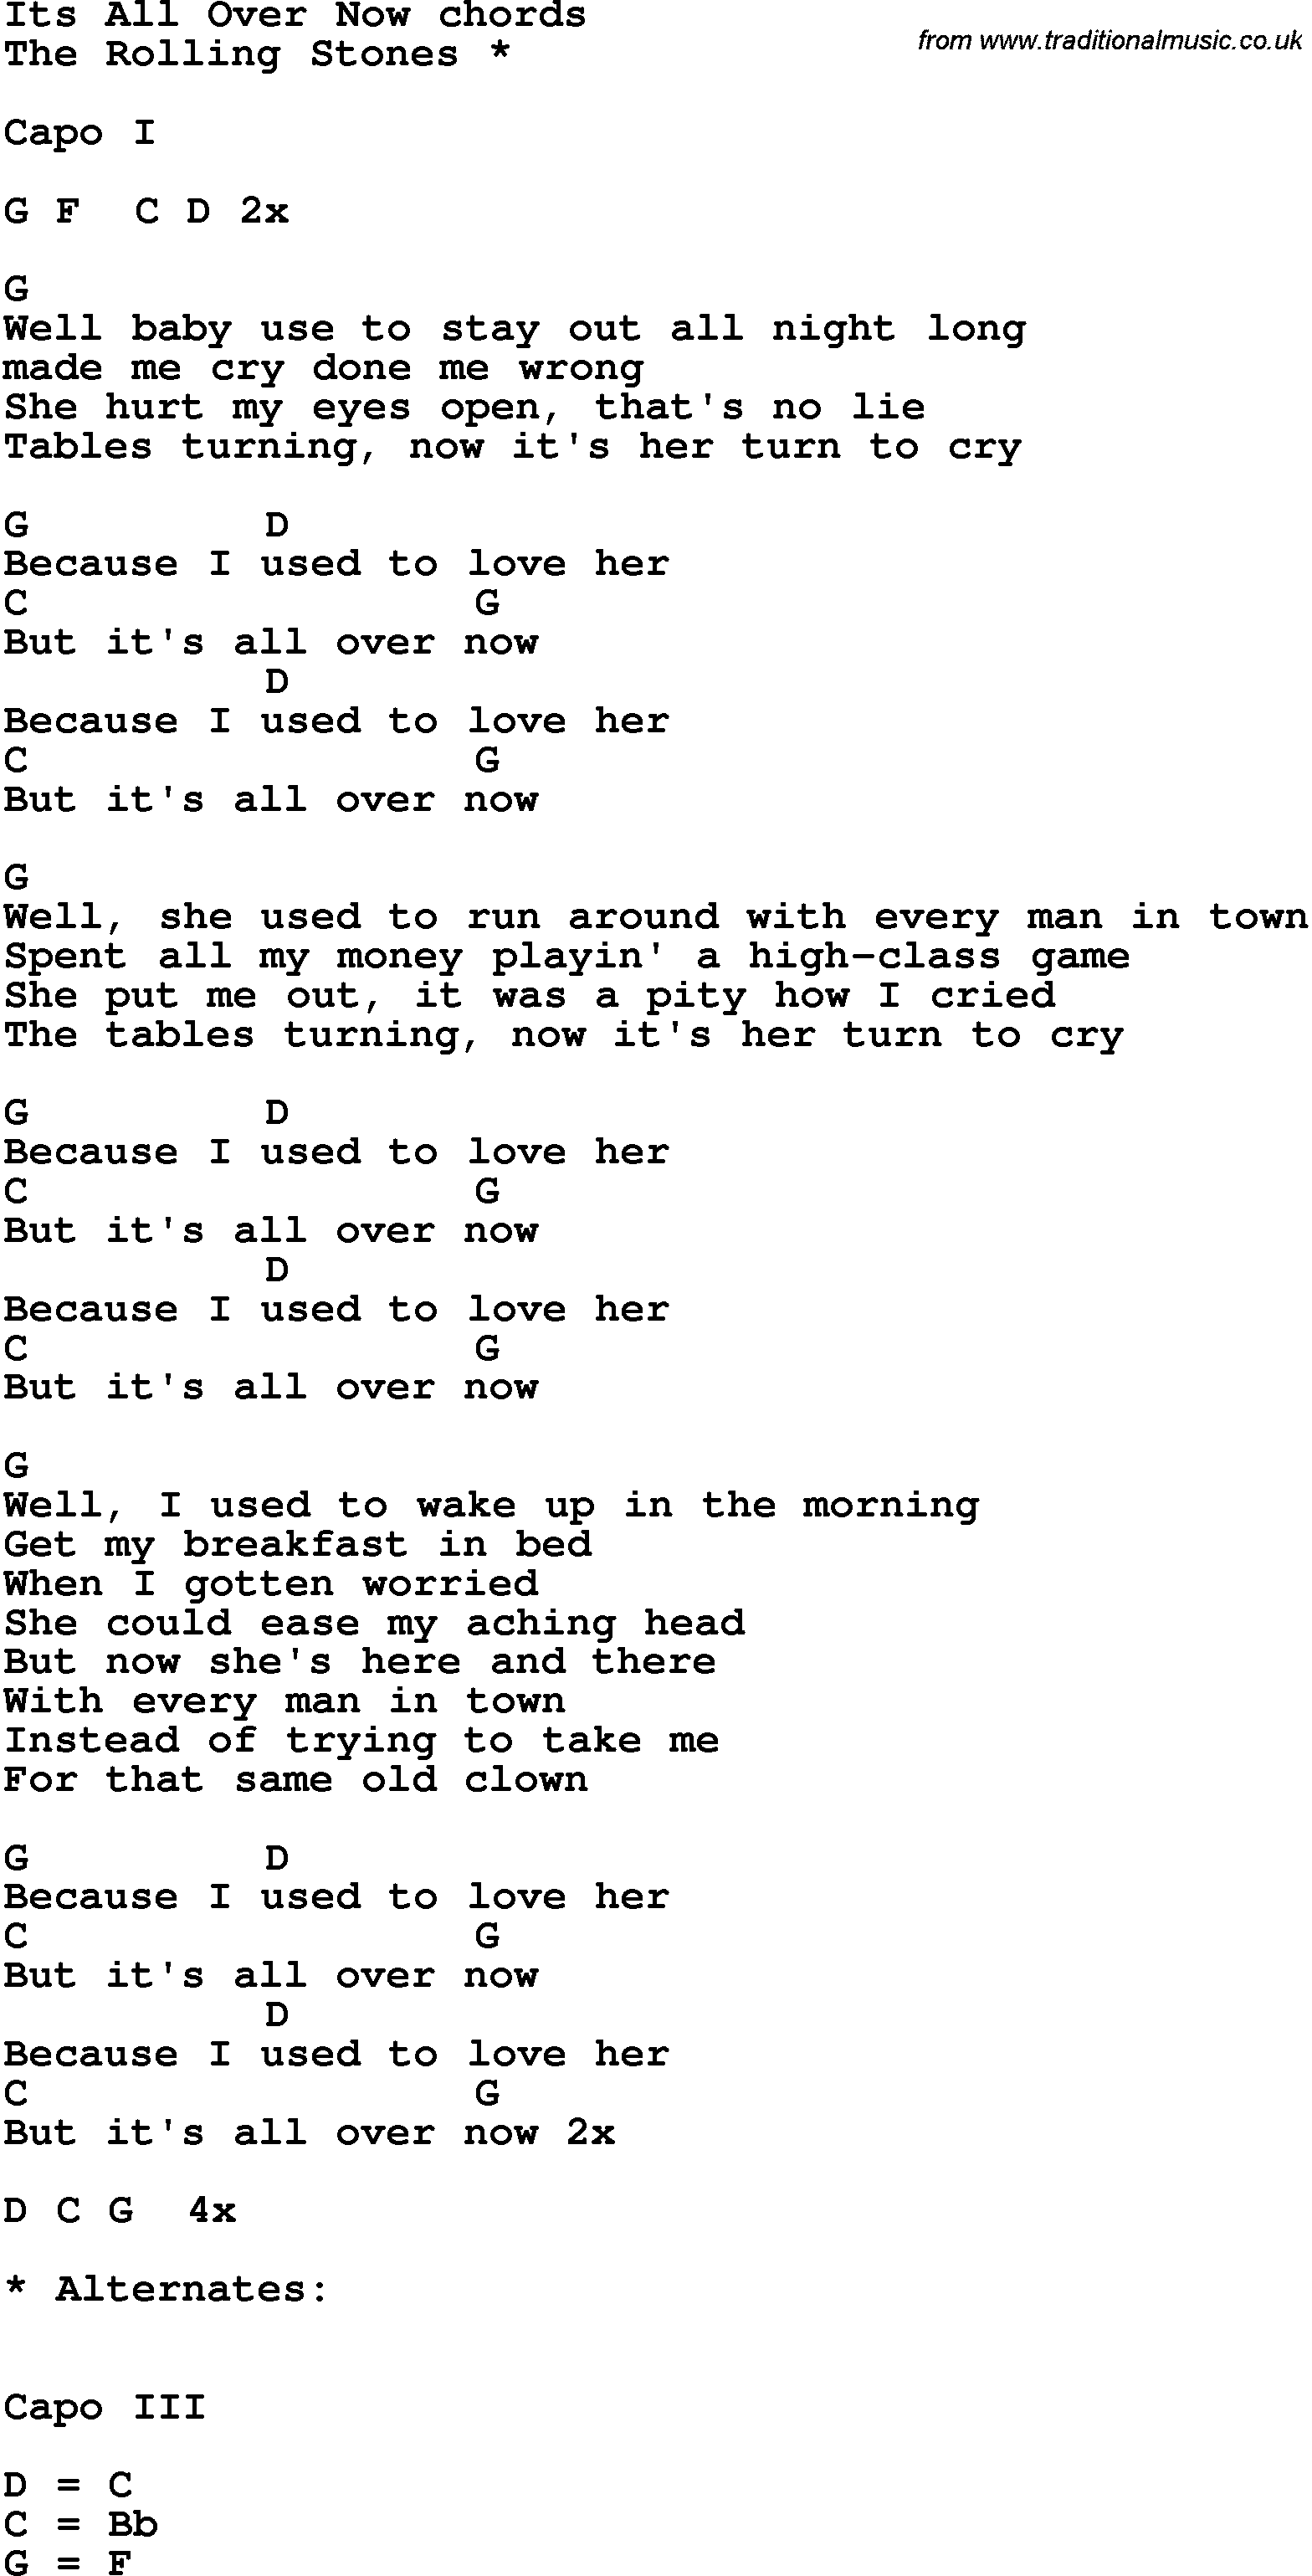 Song Lyrics with guitar chords for It's All Over Now